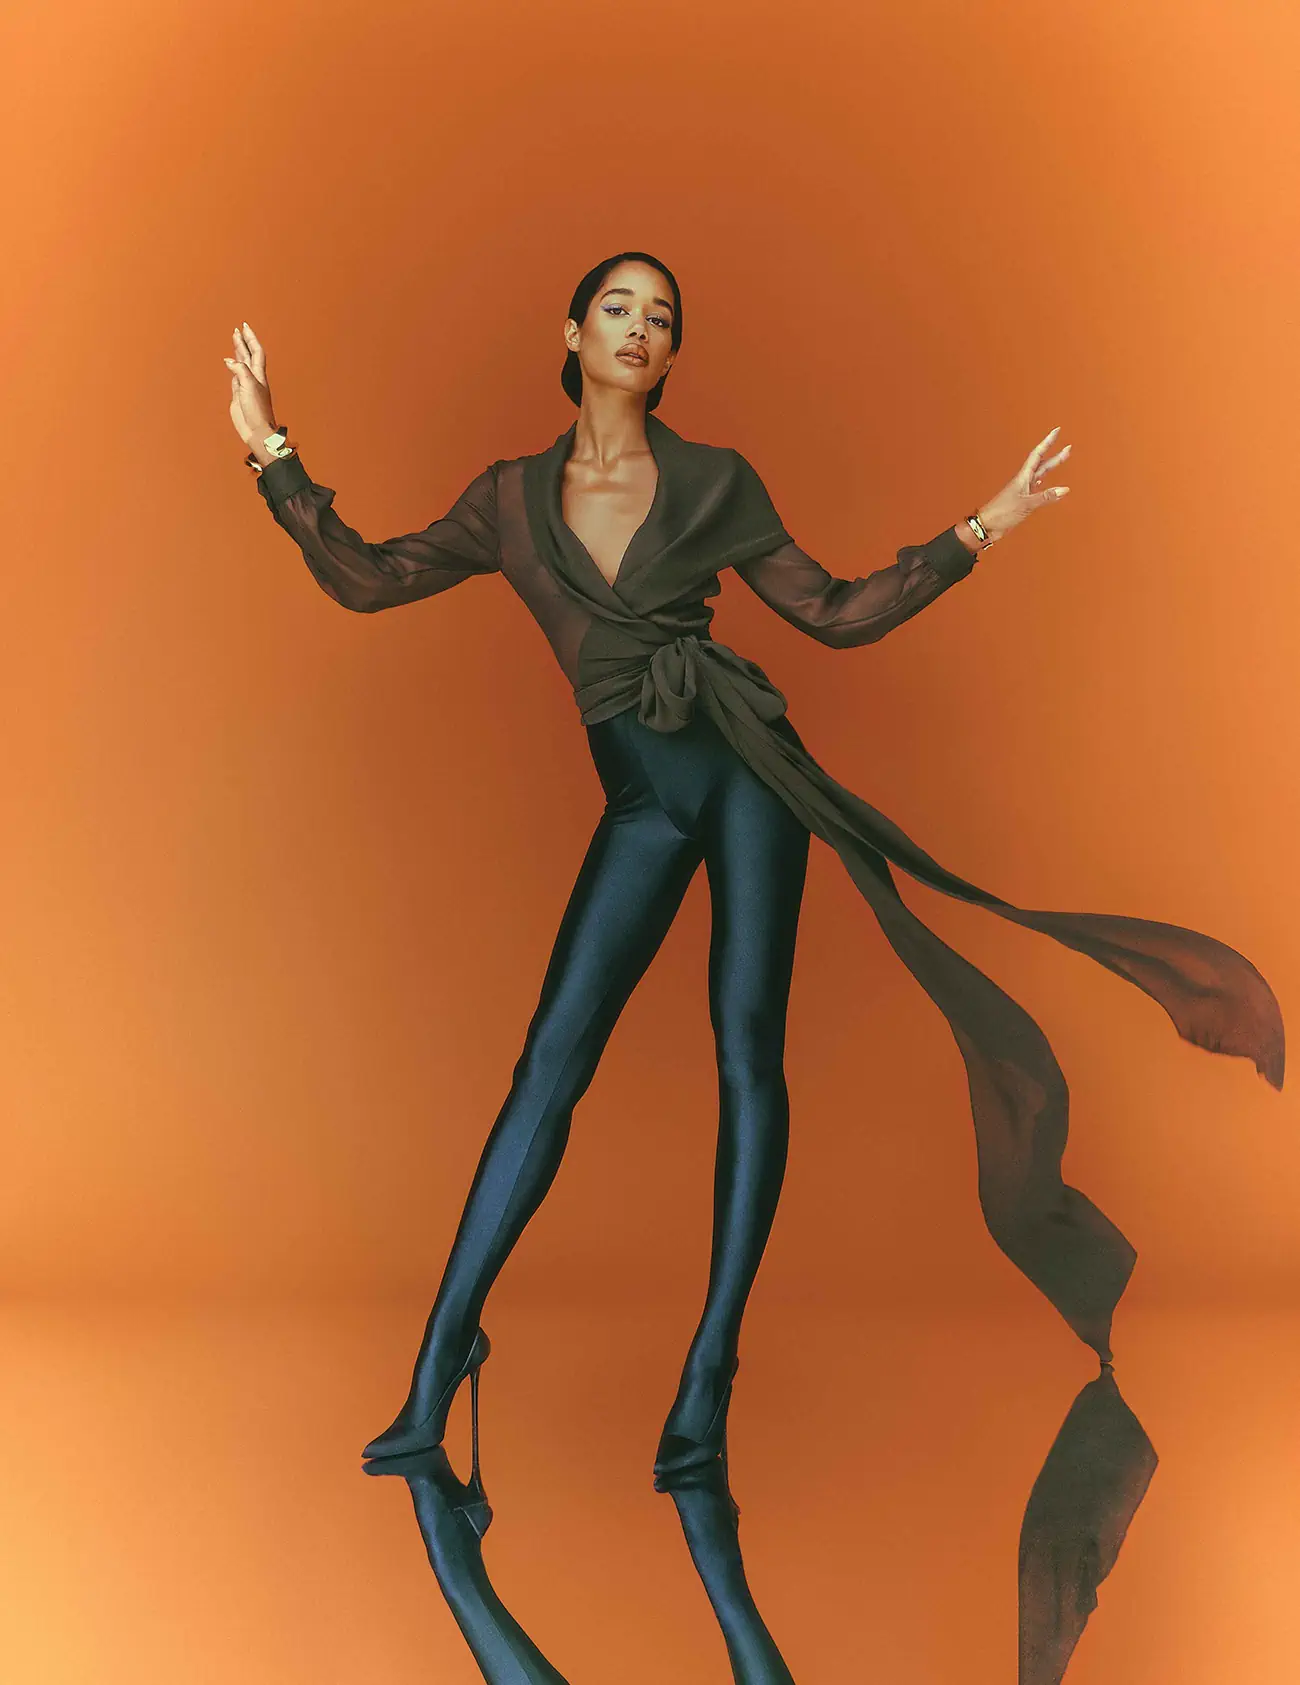 Laura Harrier covers Flaunt Magazine Issue 187 by Chrisean Rose